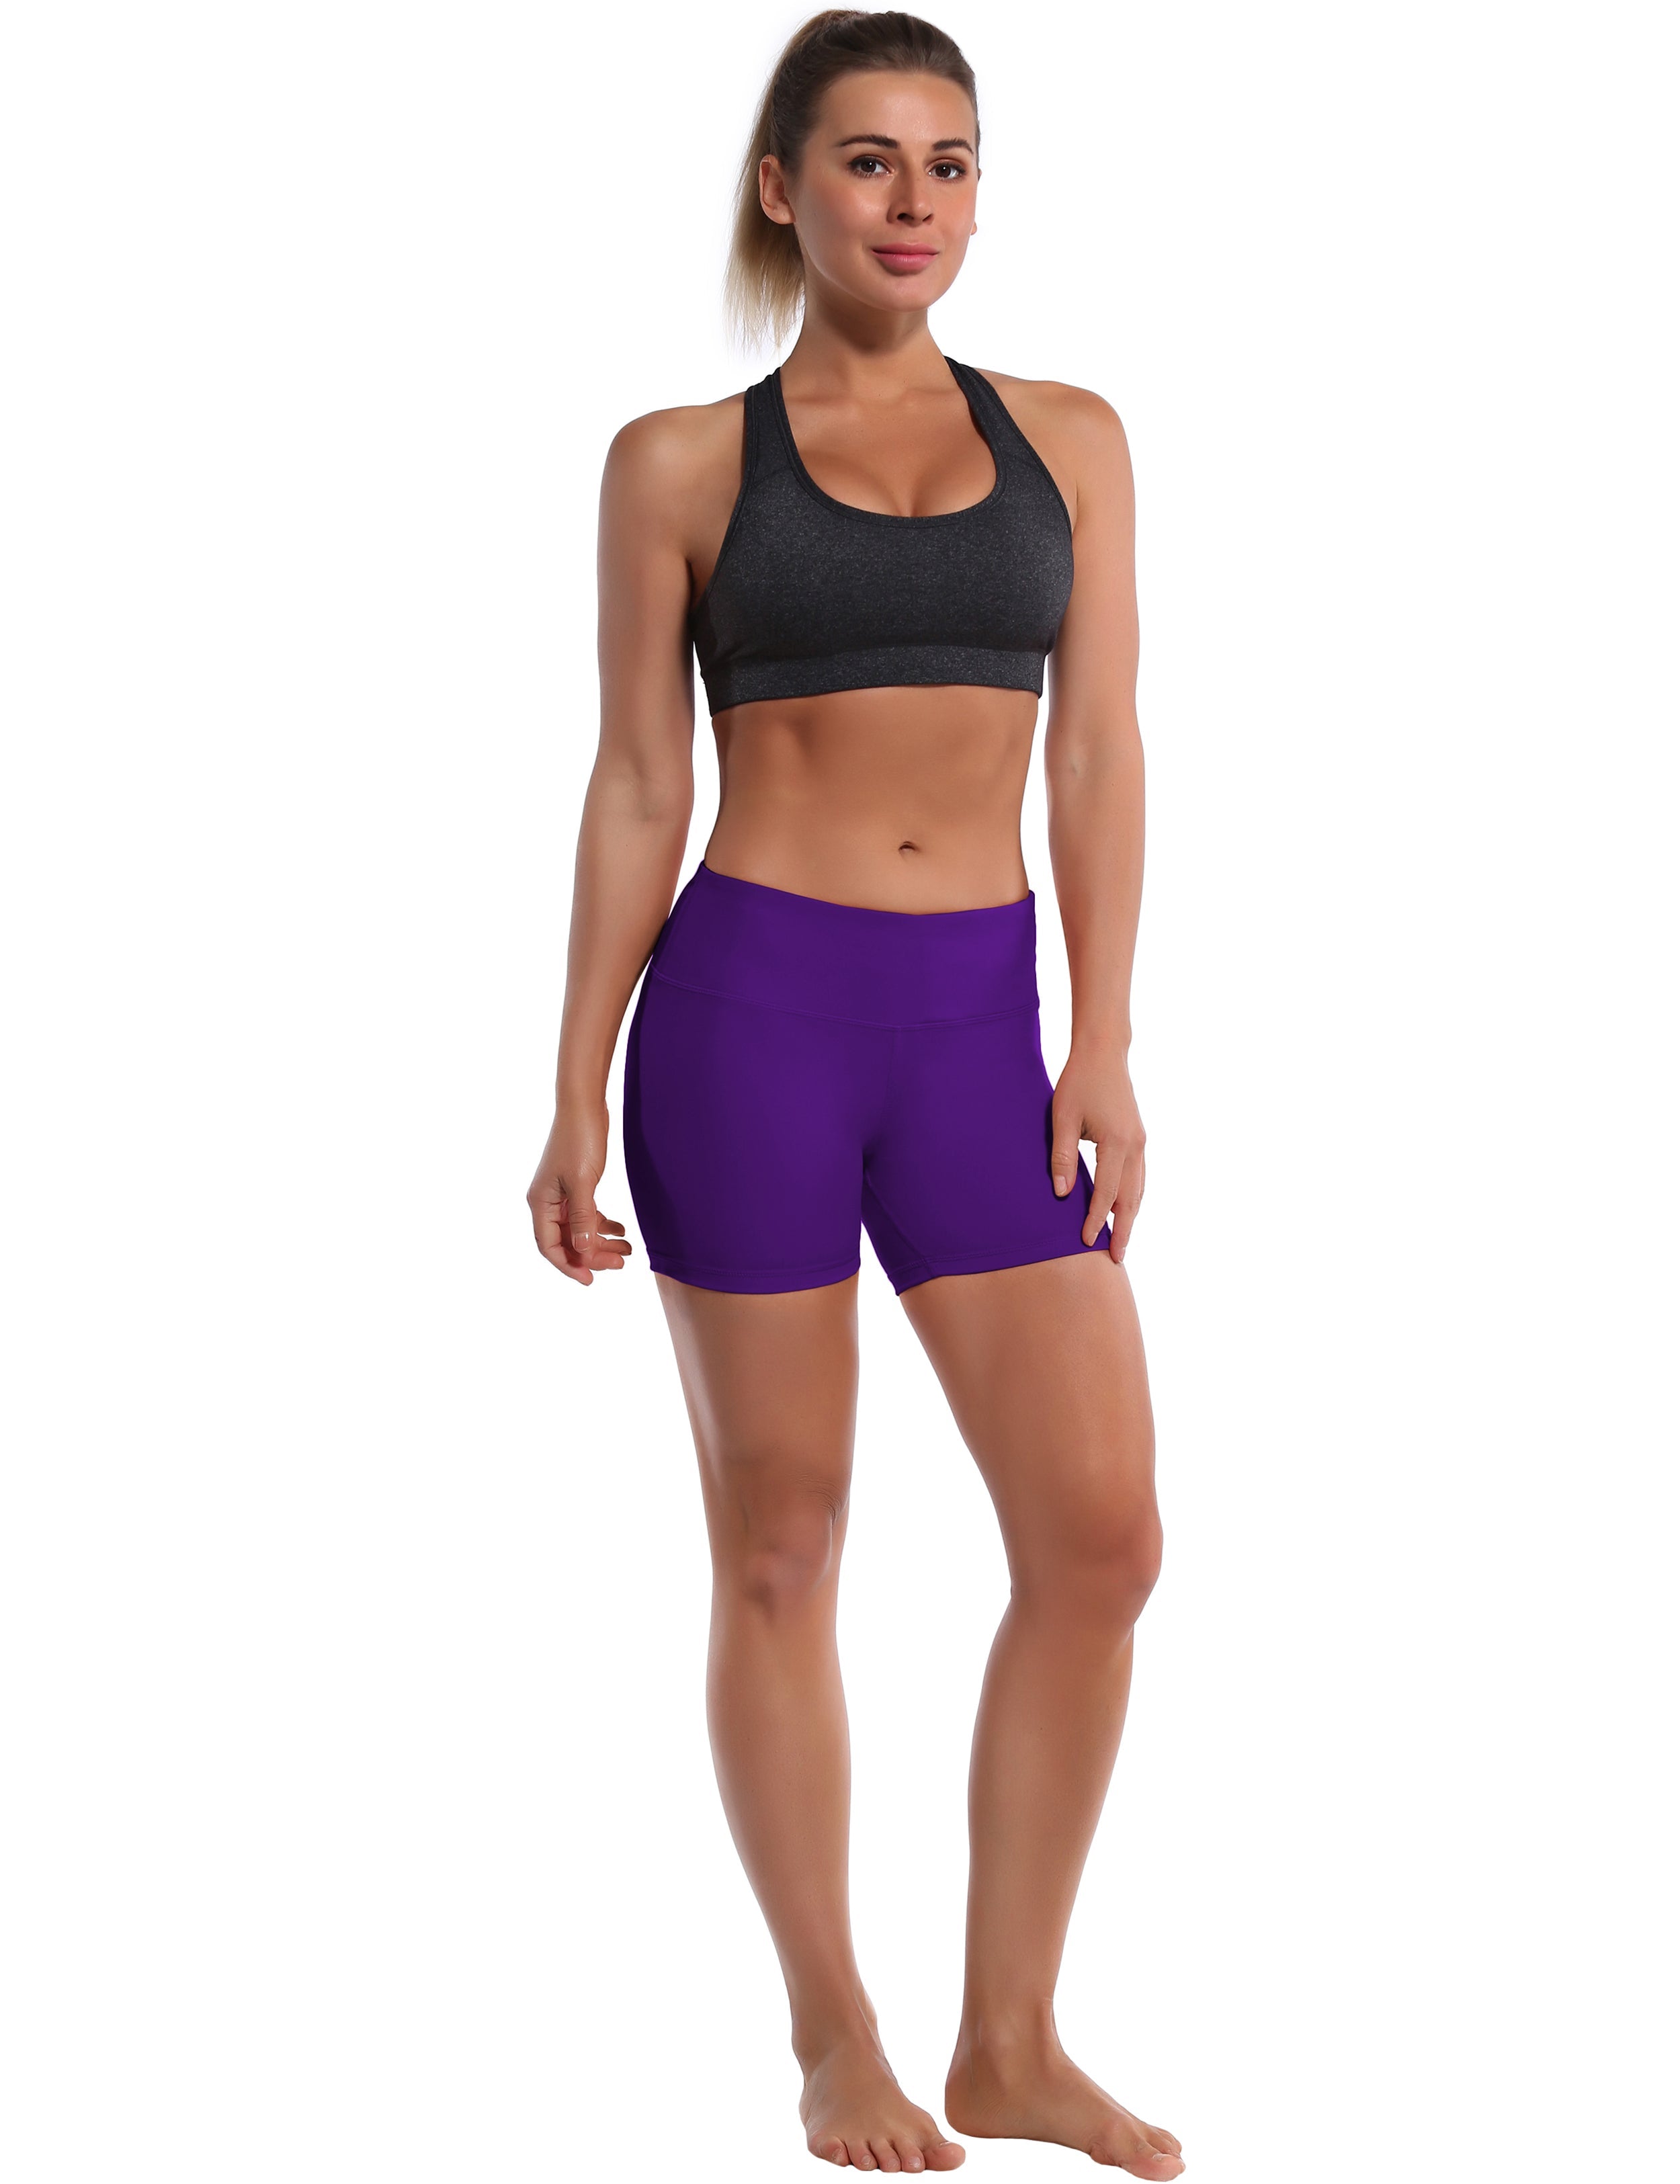 4" Golf Shorts eggplantpurple Sleek, soft, smooth and totally comfortable: our newest style is here. Softest-ever fabric High elasticity High density 4-way stretch Fabric doesn't attract lint easily No see-through Moisture-wicking Machine wash 75% Nylon, 25% Spandex